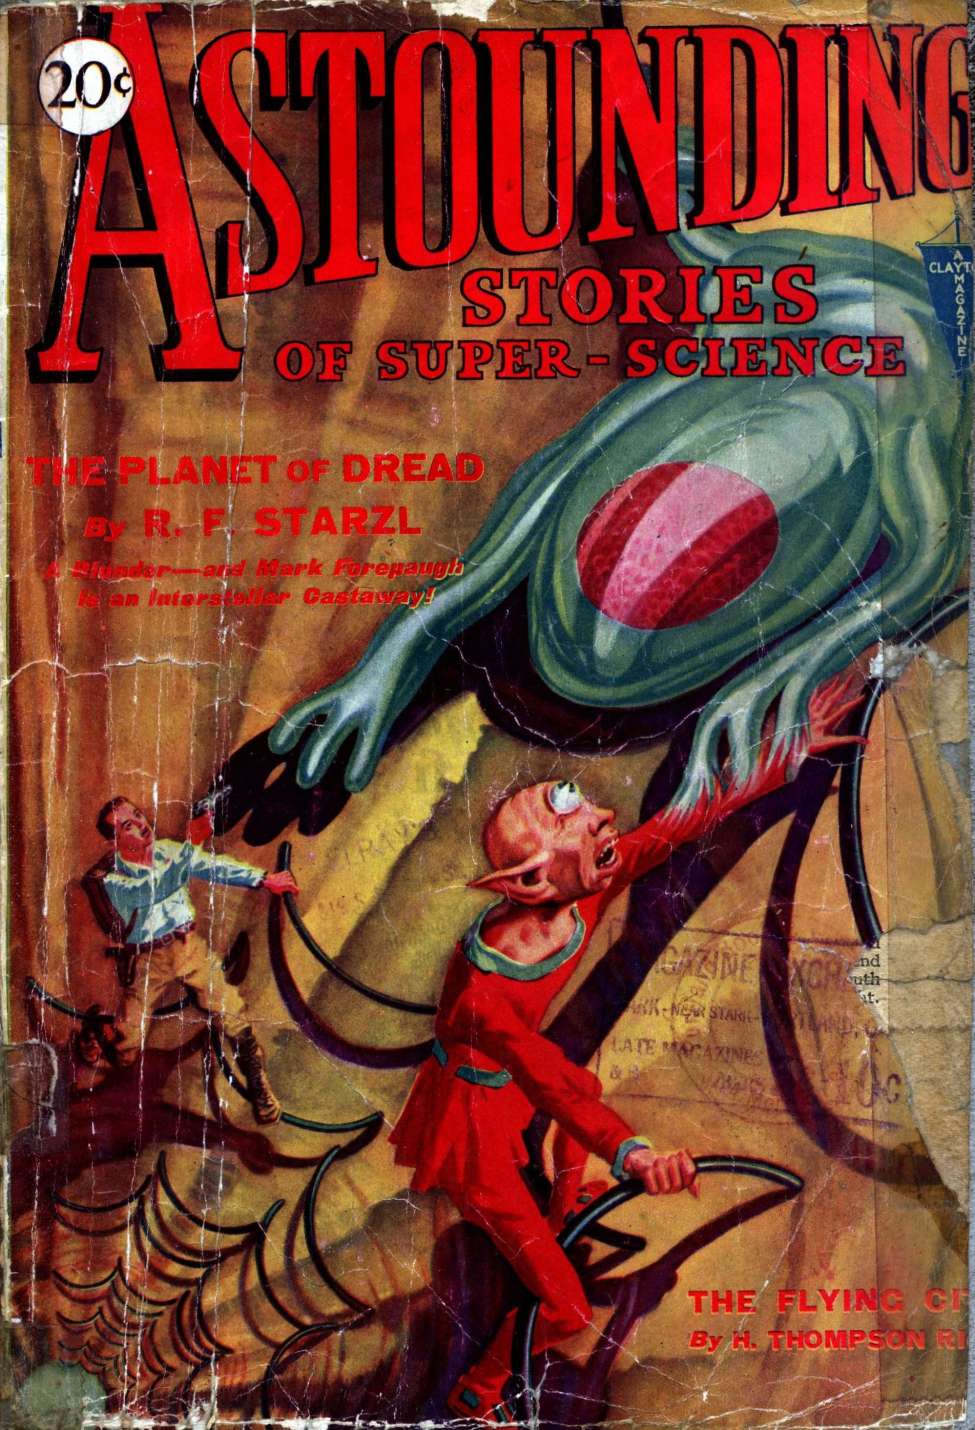 Comic Book Cover For Astounding v3 2 - The Planet of Dread - R. F. Starzl